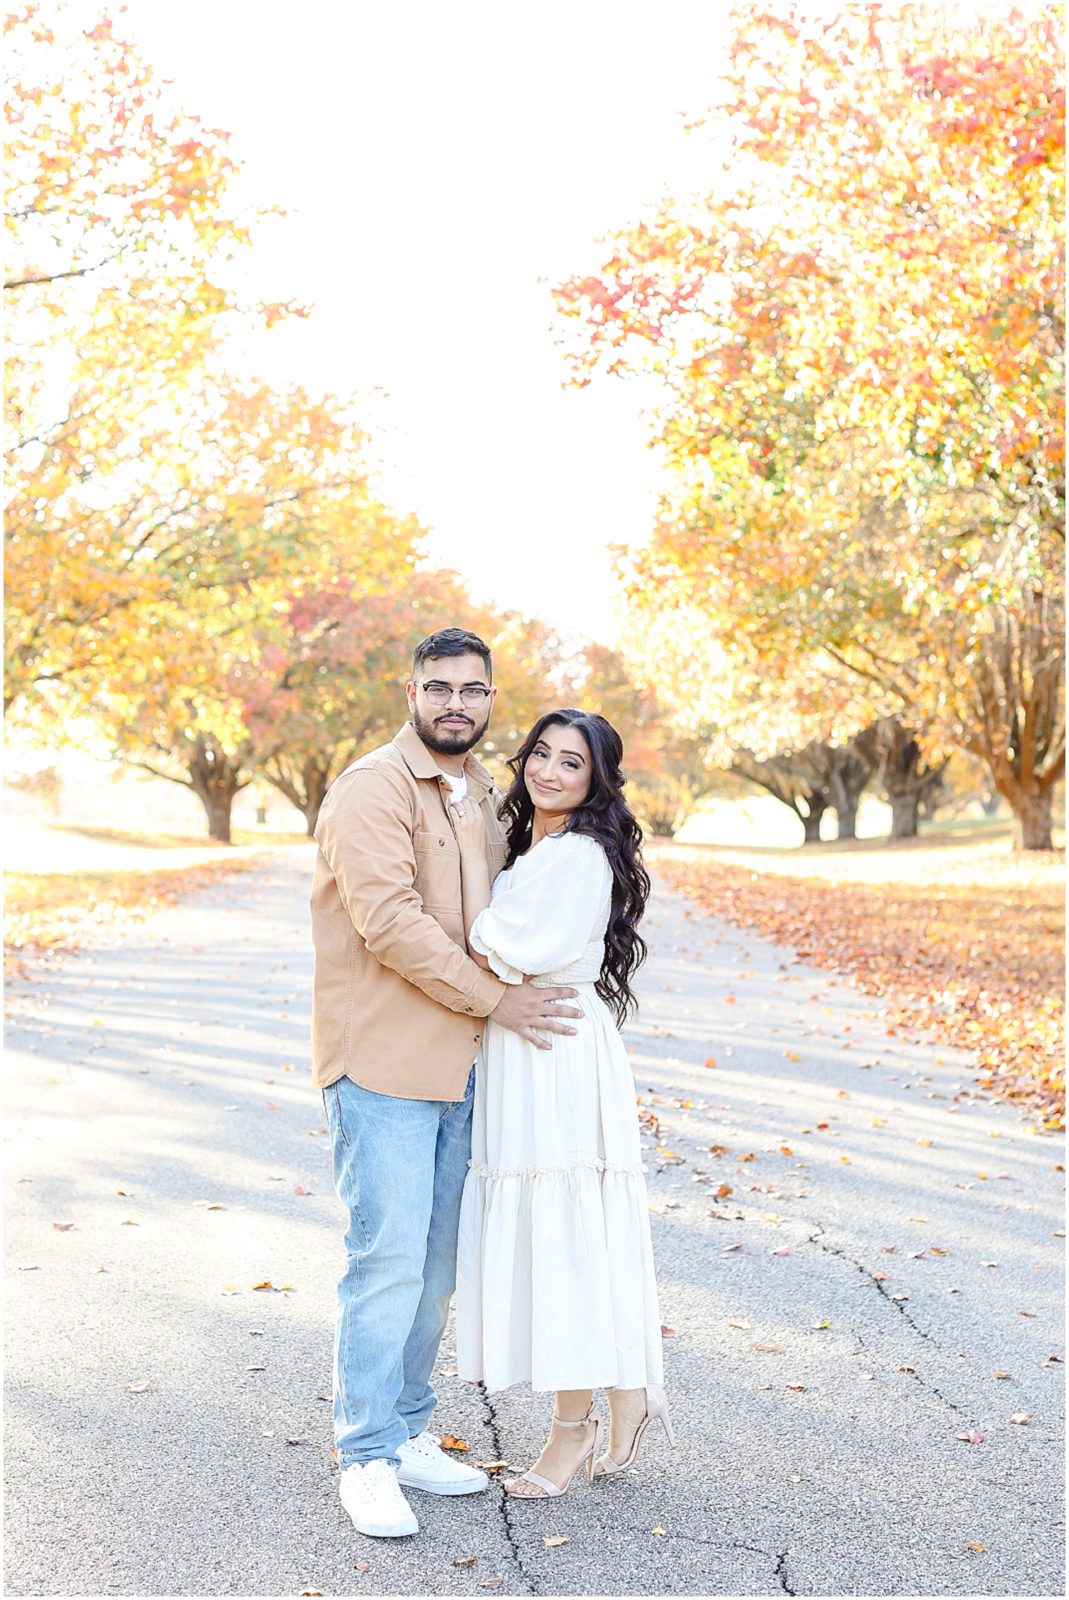 engagement portraits style | Family Photos | Family Photographer in Kansas | Family Photography Kansas City | Shawnee Mission Park | Where to take photos in the fall | What to wear for a fall engagement or family session | Kansas City Missouri Wedding & Portrait Photography